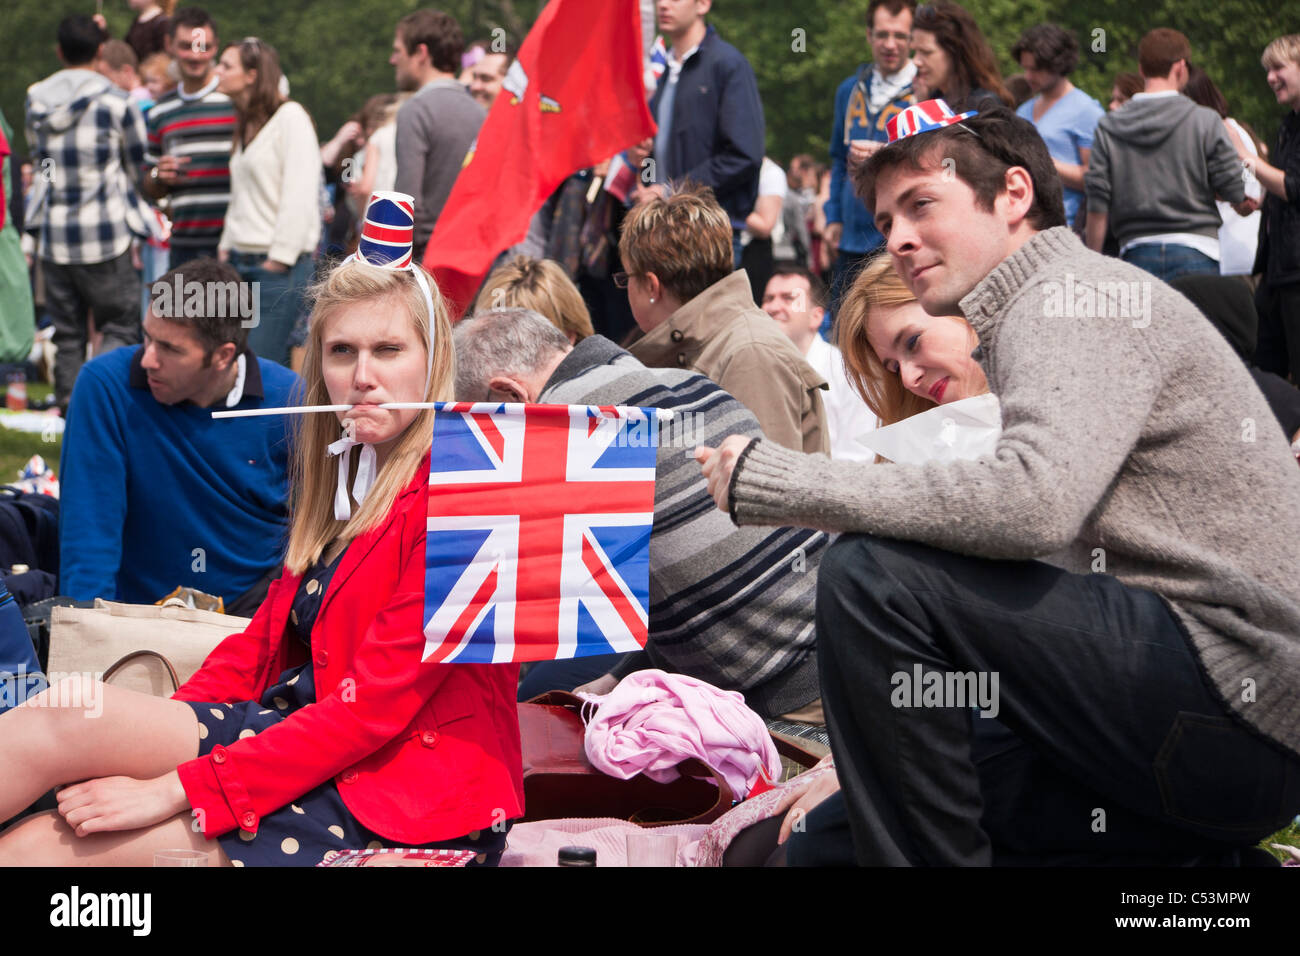 People celebrating the Royal Wedding in Hyde Park with Union Jack flags Stock Photo